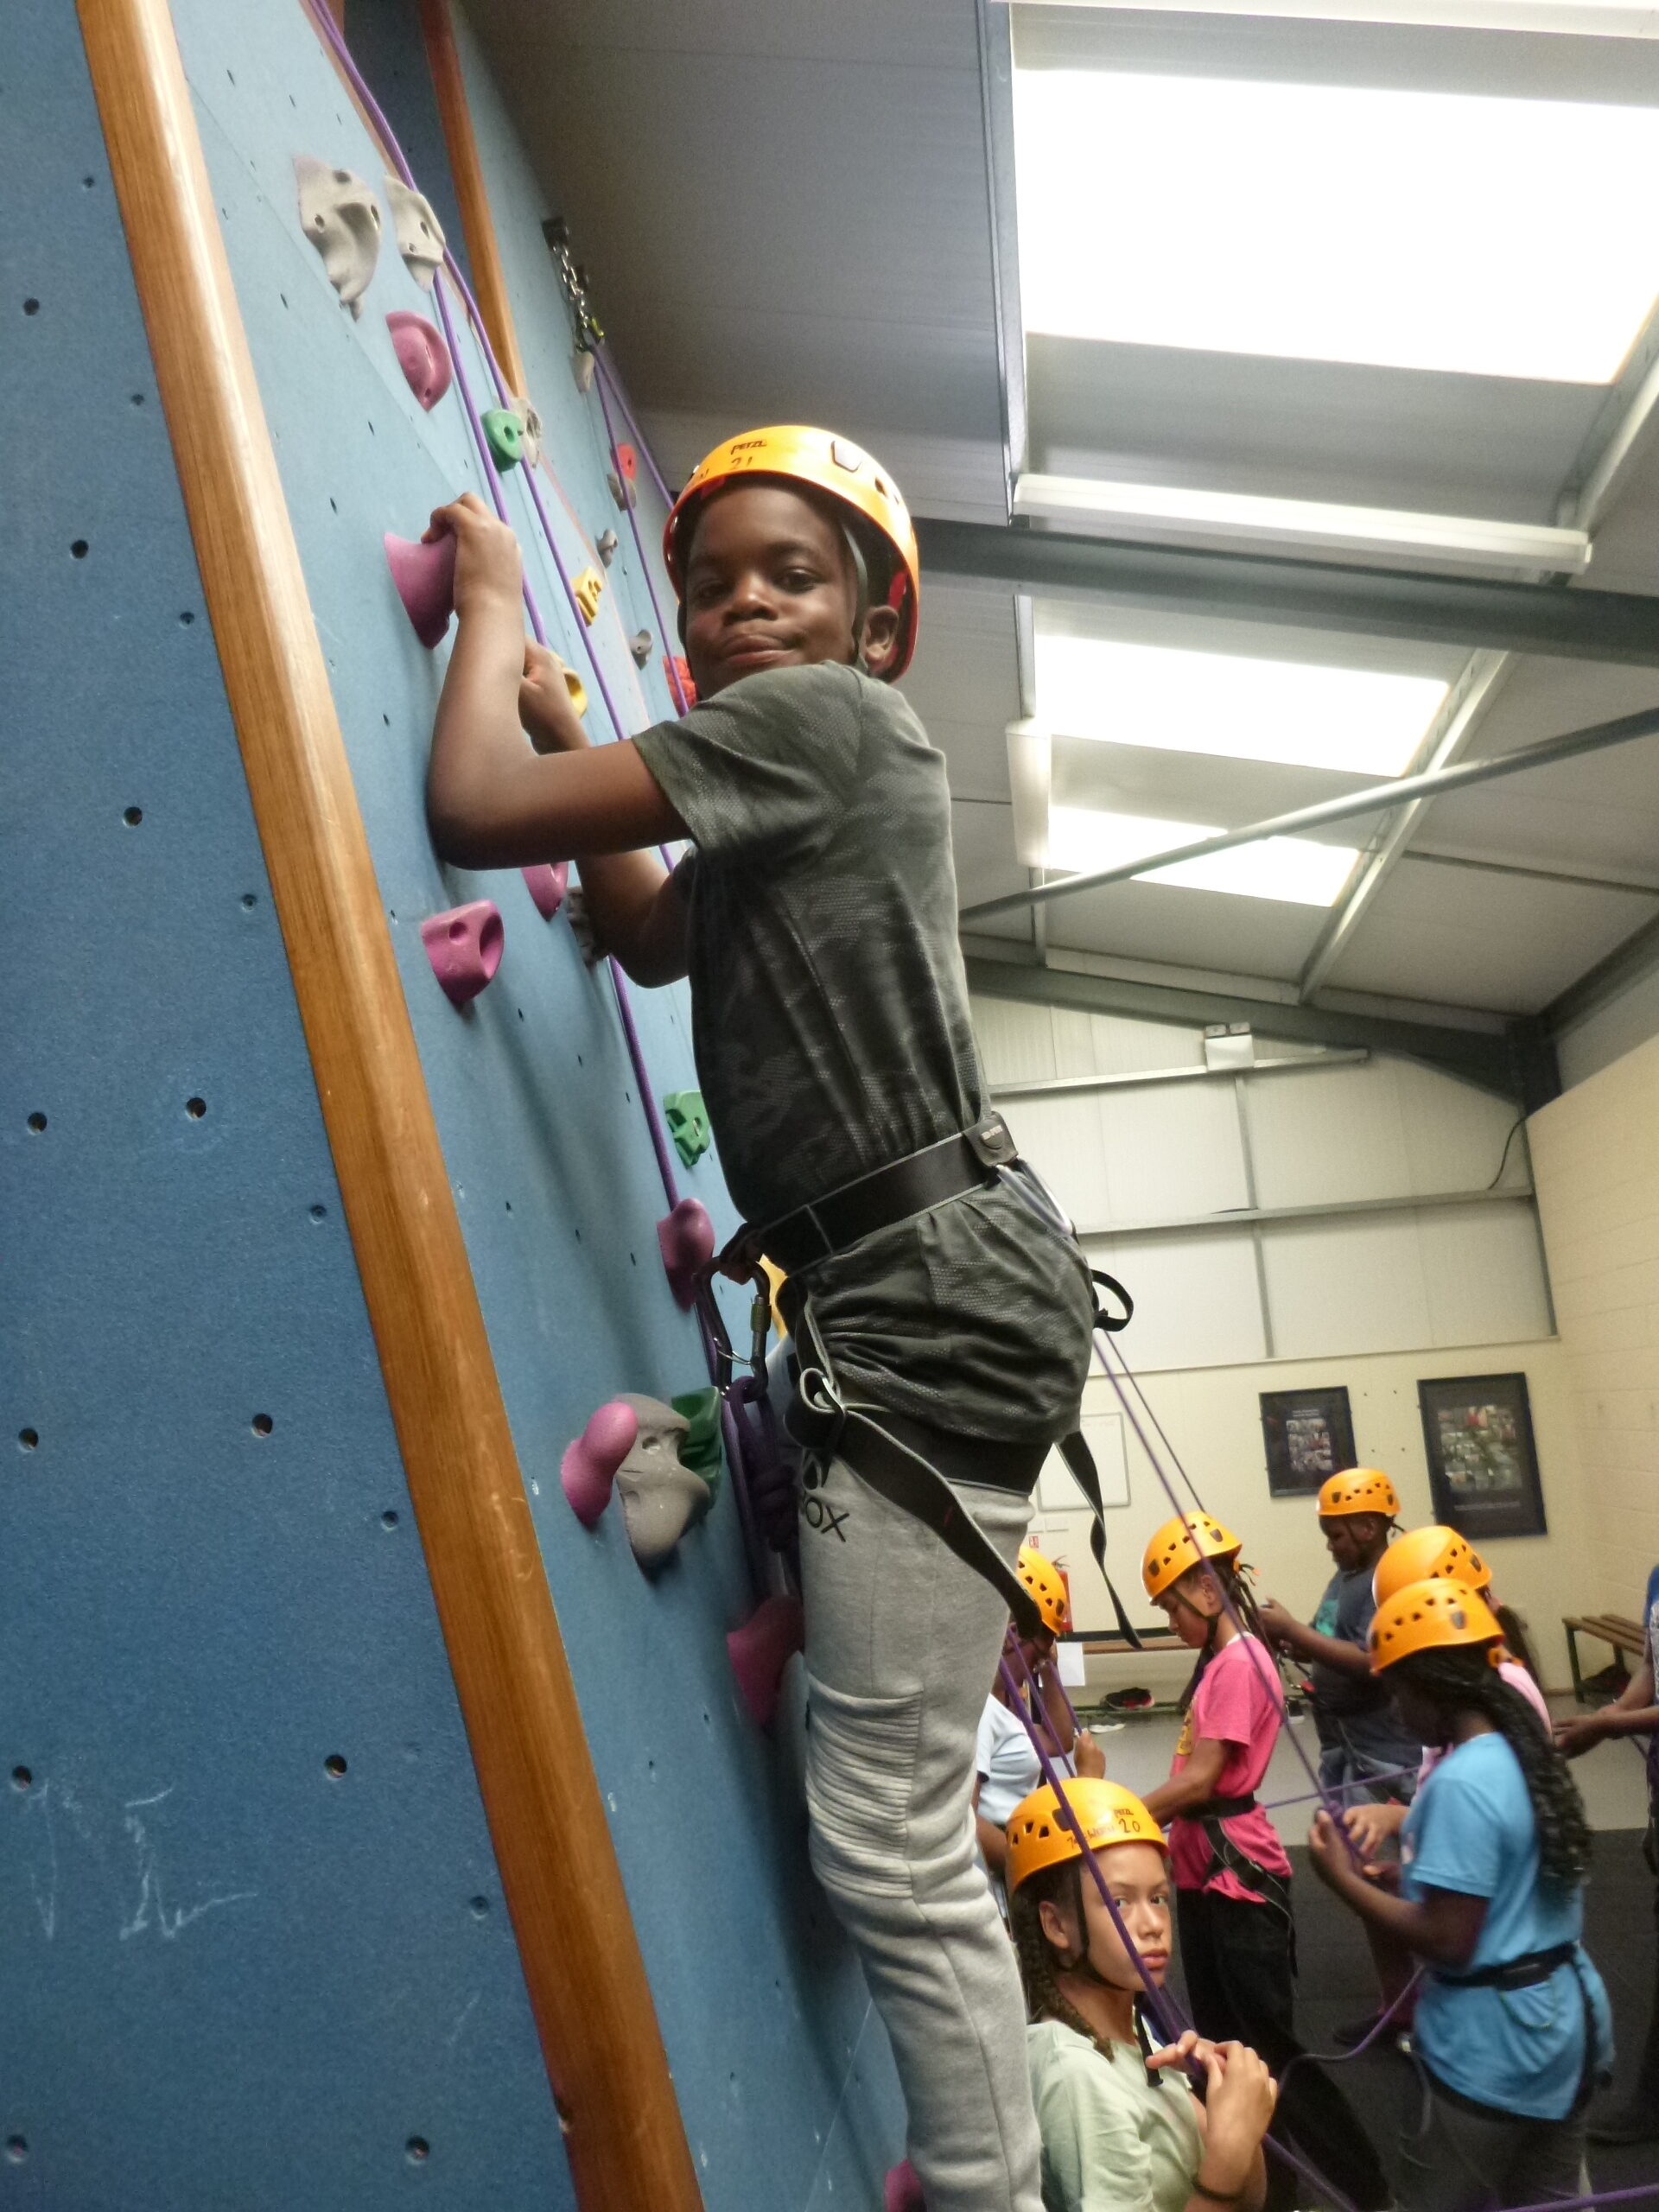 A climber on the climbing wall at Trewern